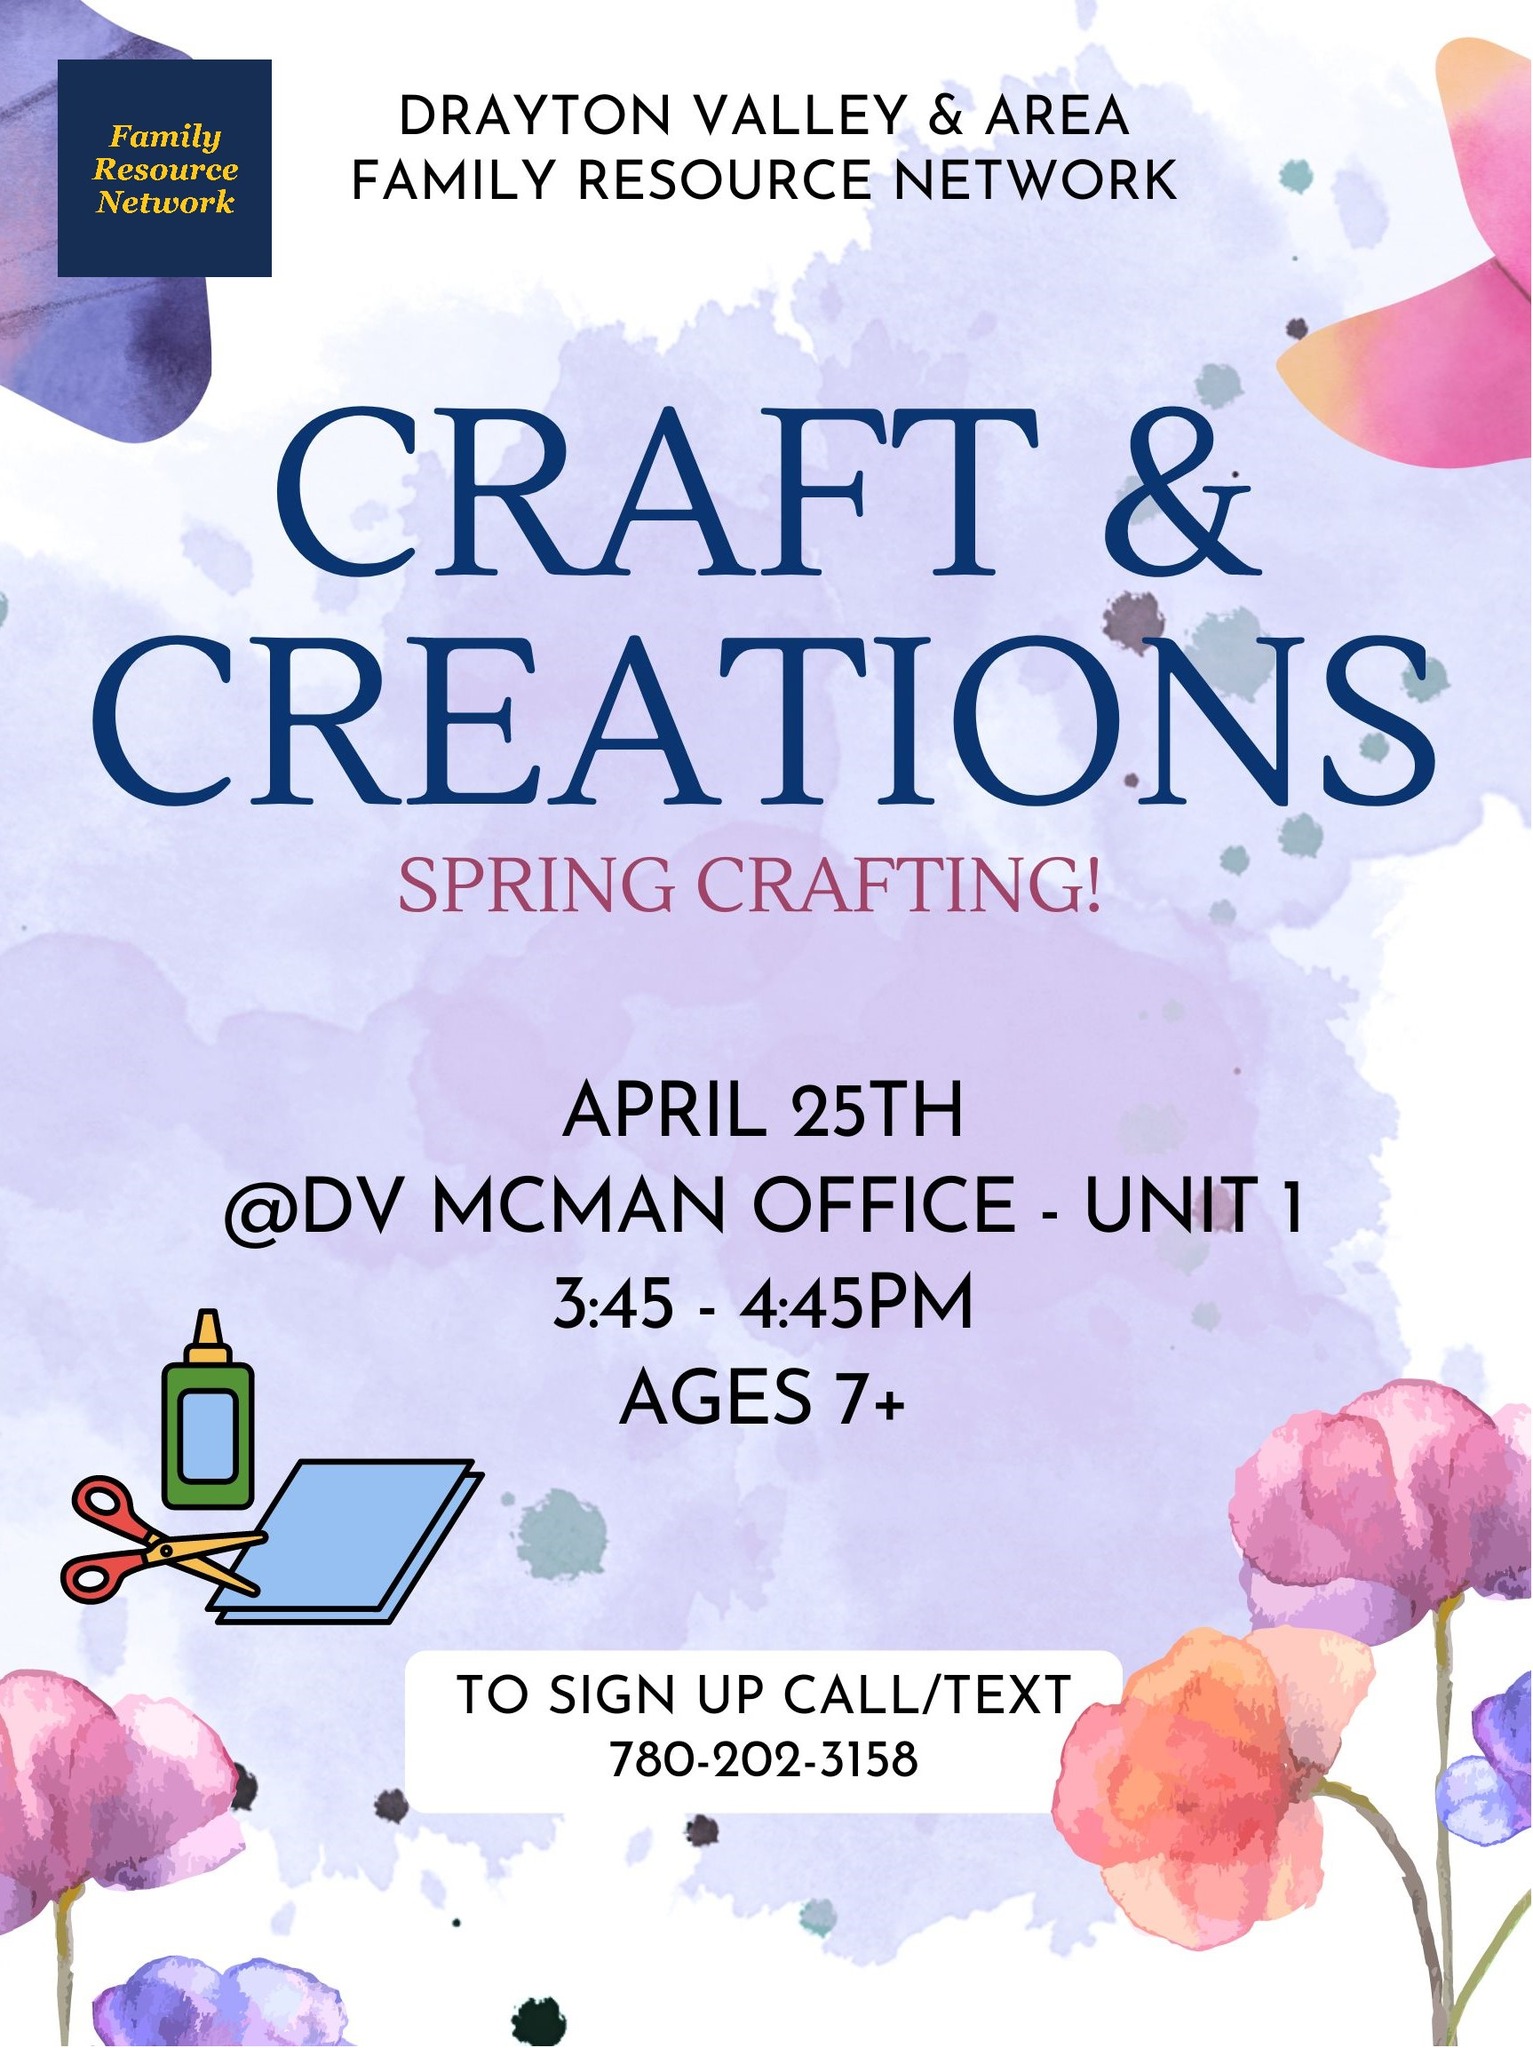 Family Resource Network - Craft & Creations